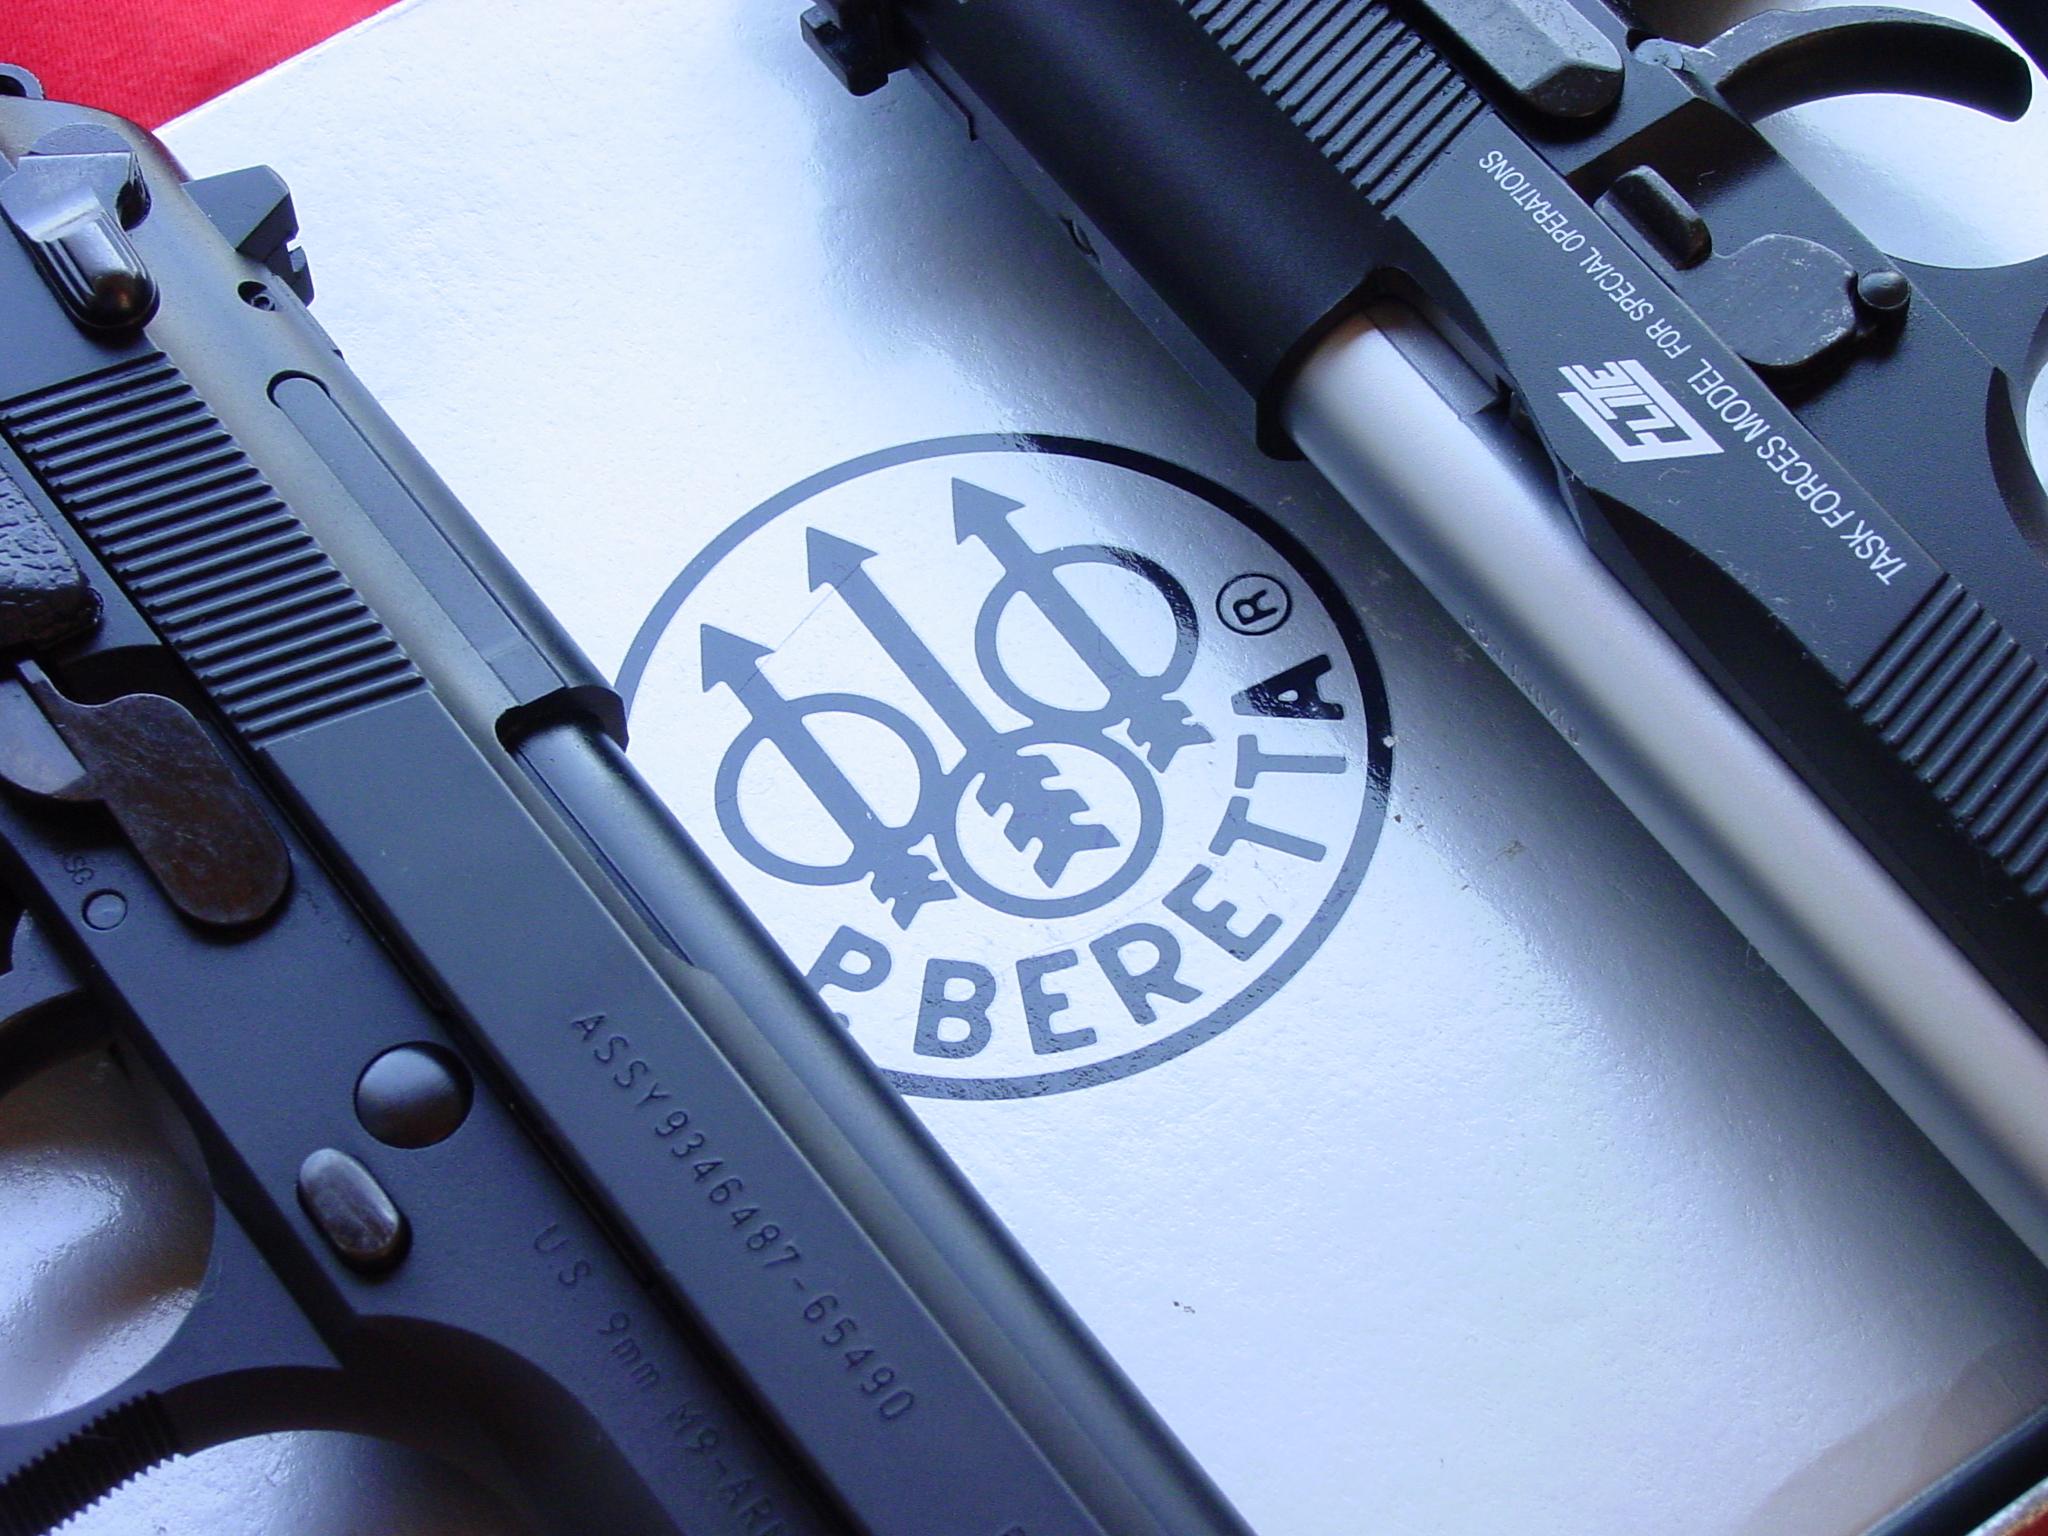 Beretta Logo Desktop Wallpaper And Make This For Your